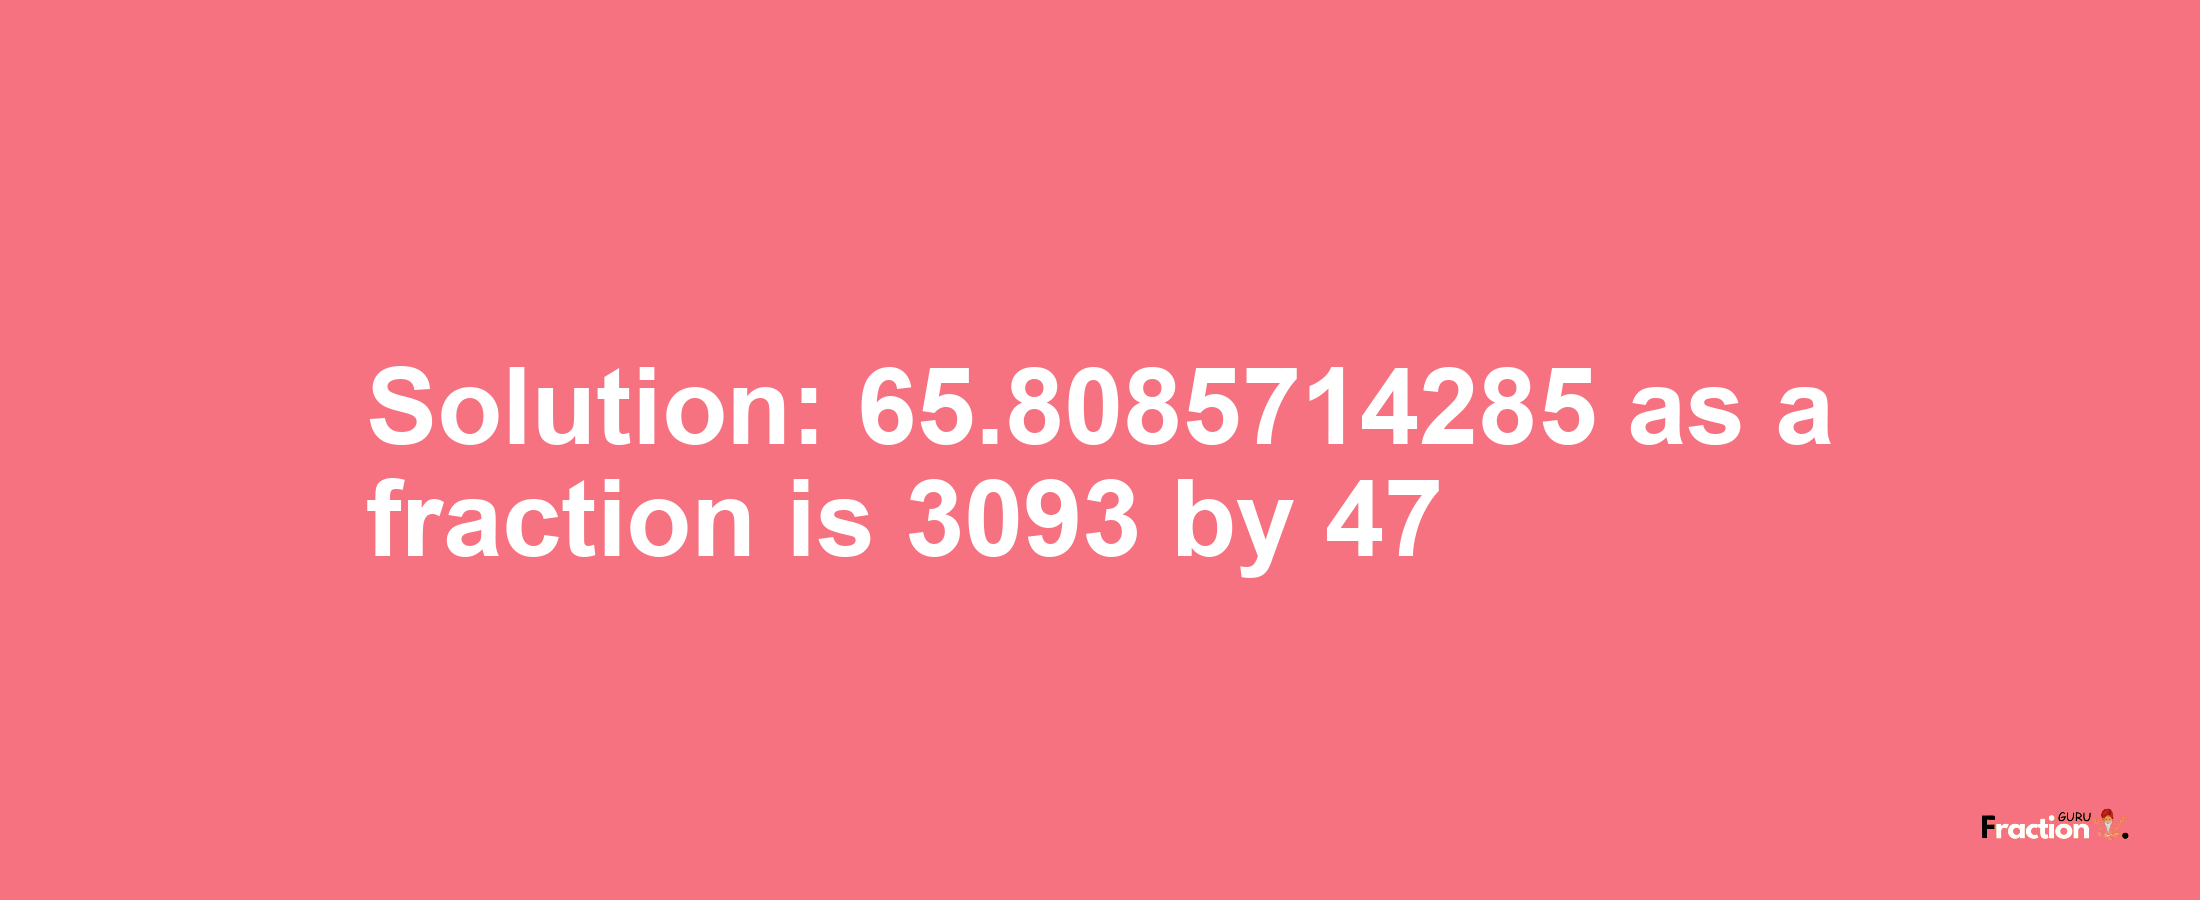 Solution:65.8085714285 as a fraction is 3093/47